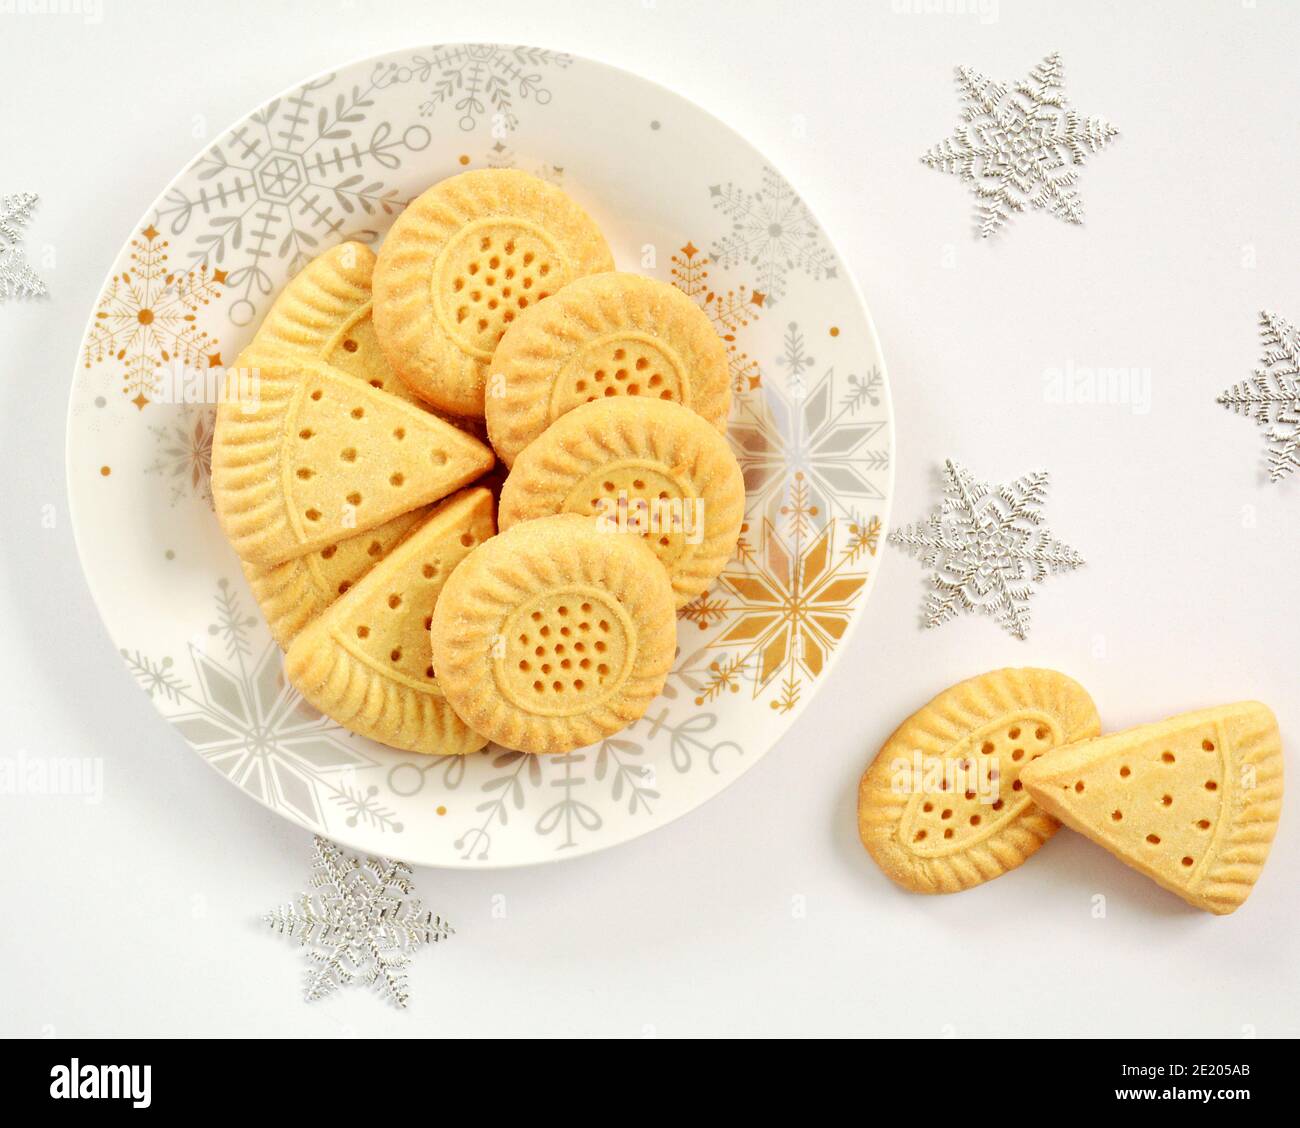 https://c8.alamy.com/comp/2E205AB/all-butter-shortbread-biscuits-on-white-plate-with-decorative-snowflakes-in-flat-lay-format-2E205AB.jpg